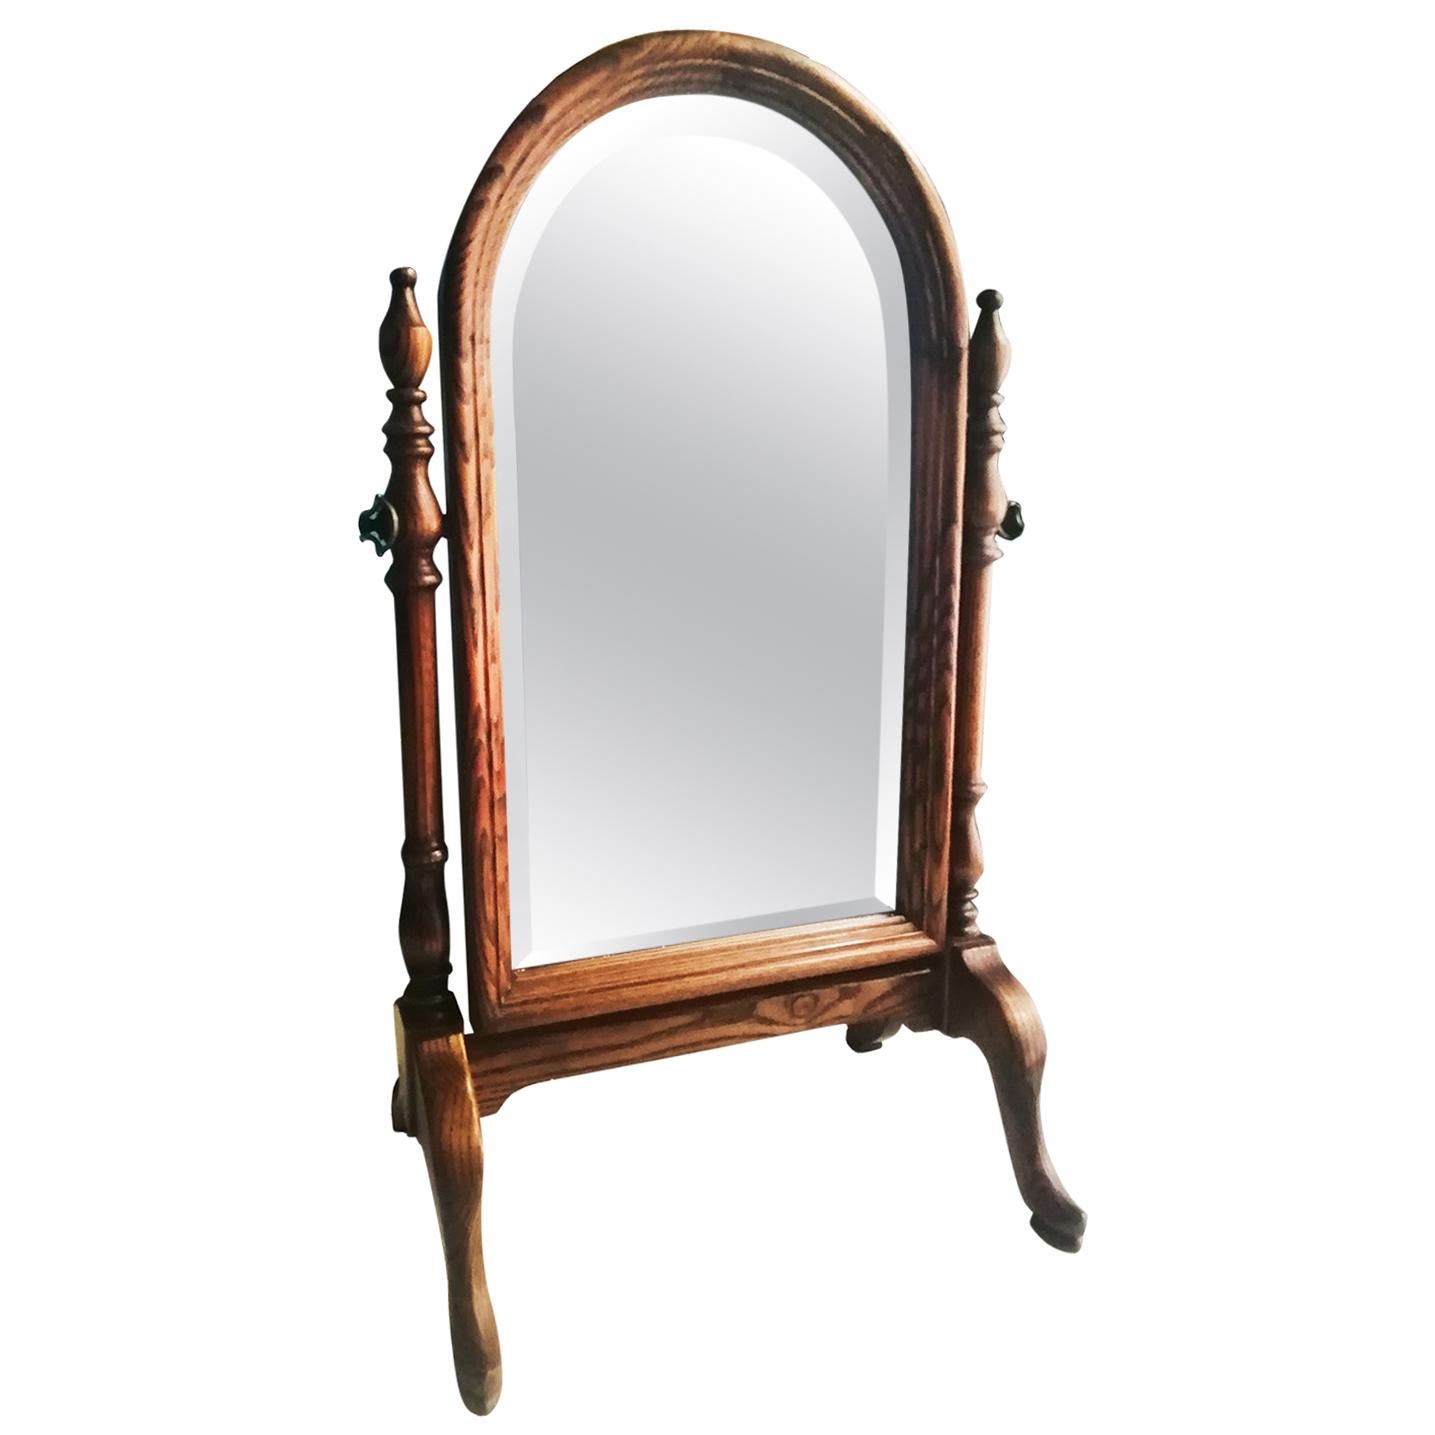 Wood Wanity table mirror or dressing mirror, early 20th century

Vaniity or dressing table mirror 
Beautiful folding mirror, to put on top of a table or console. It is a beveled mirror with a semicircular shape at the top, it is foldable and it is